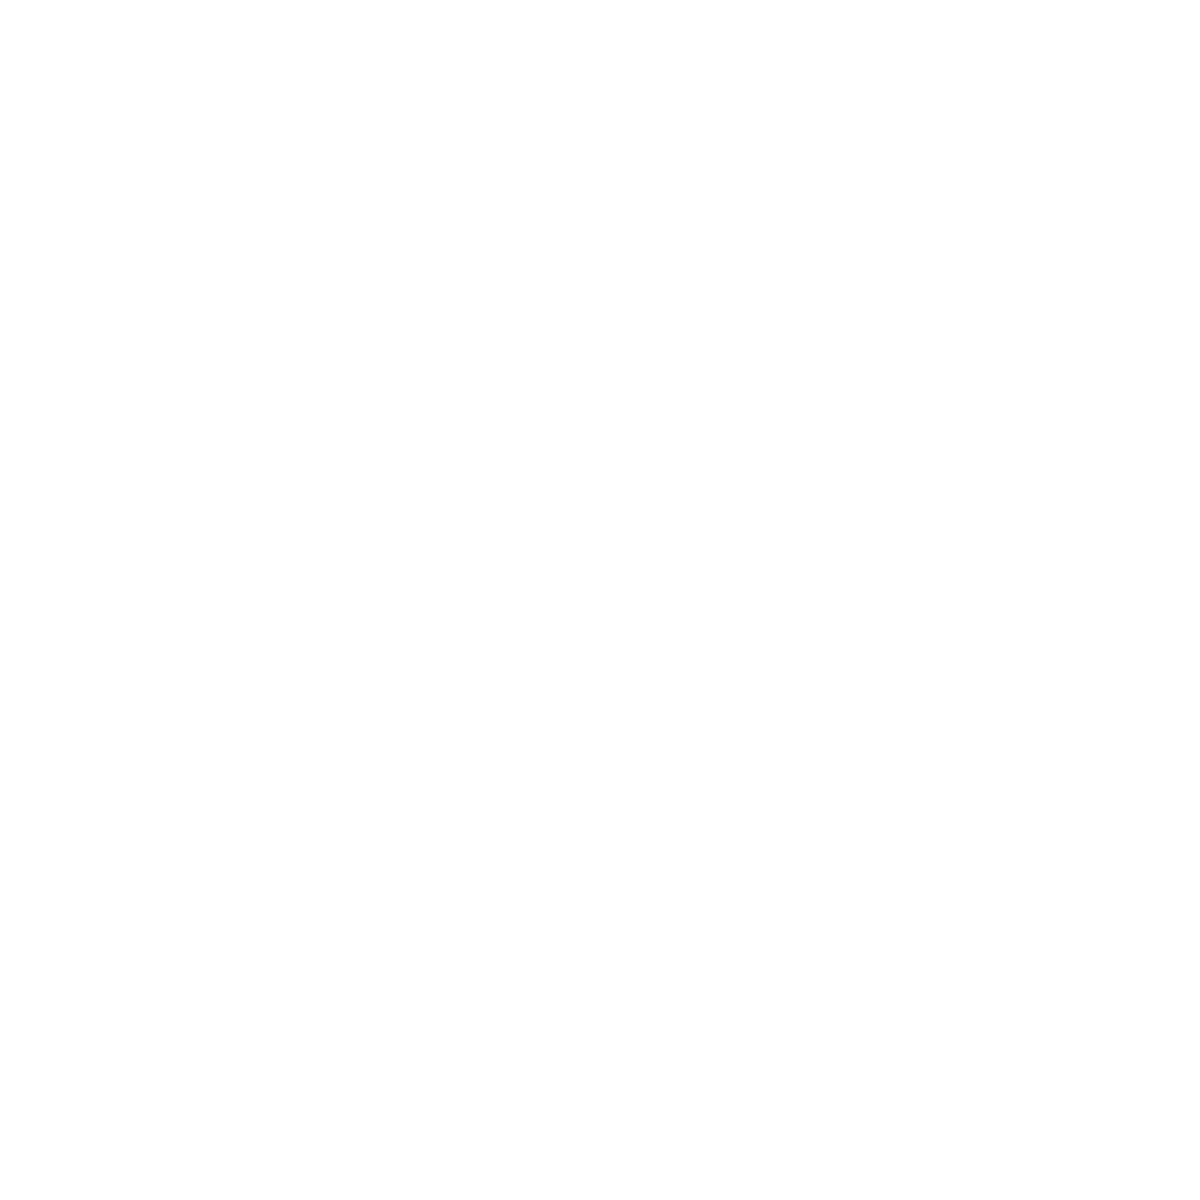 Range Hood and Microwave Oven Filters